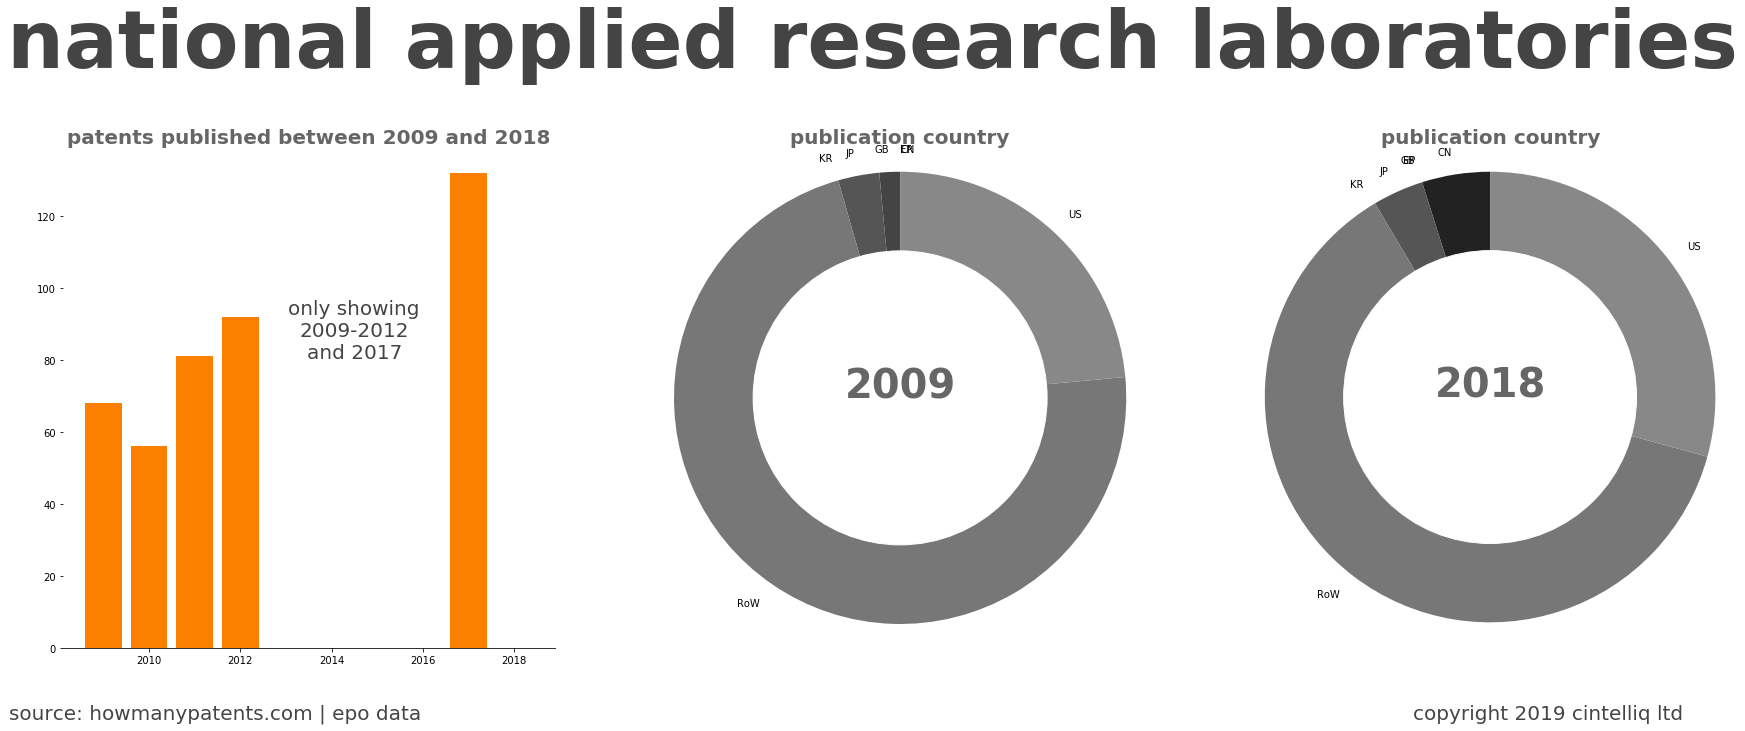 summary of patents for National Applied Research Laboratories